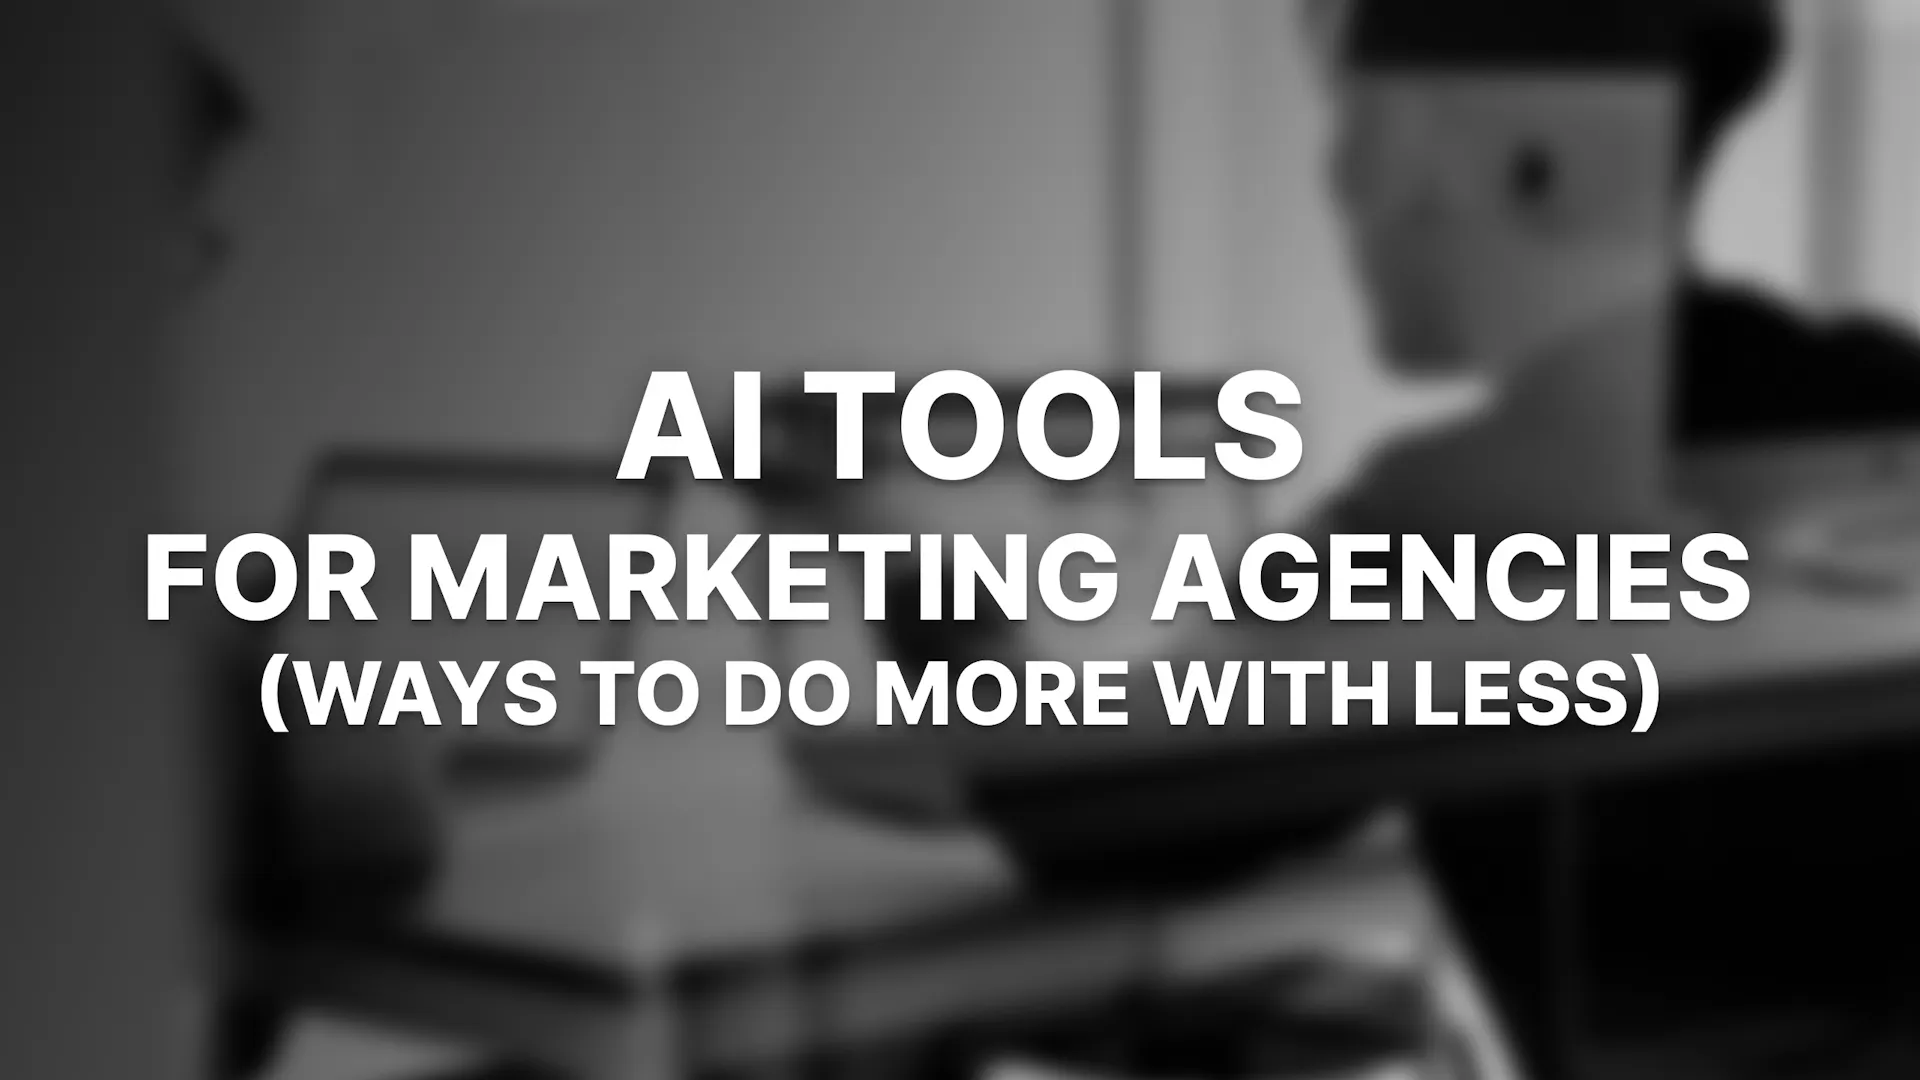 AI Tools for Marketing Agencies (+5 Ways to Do More with Less)